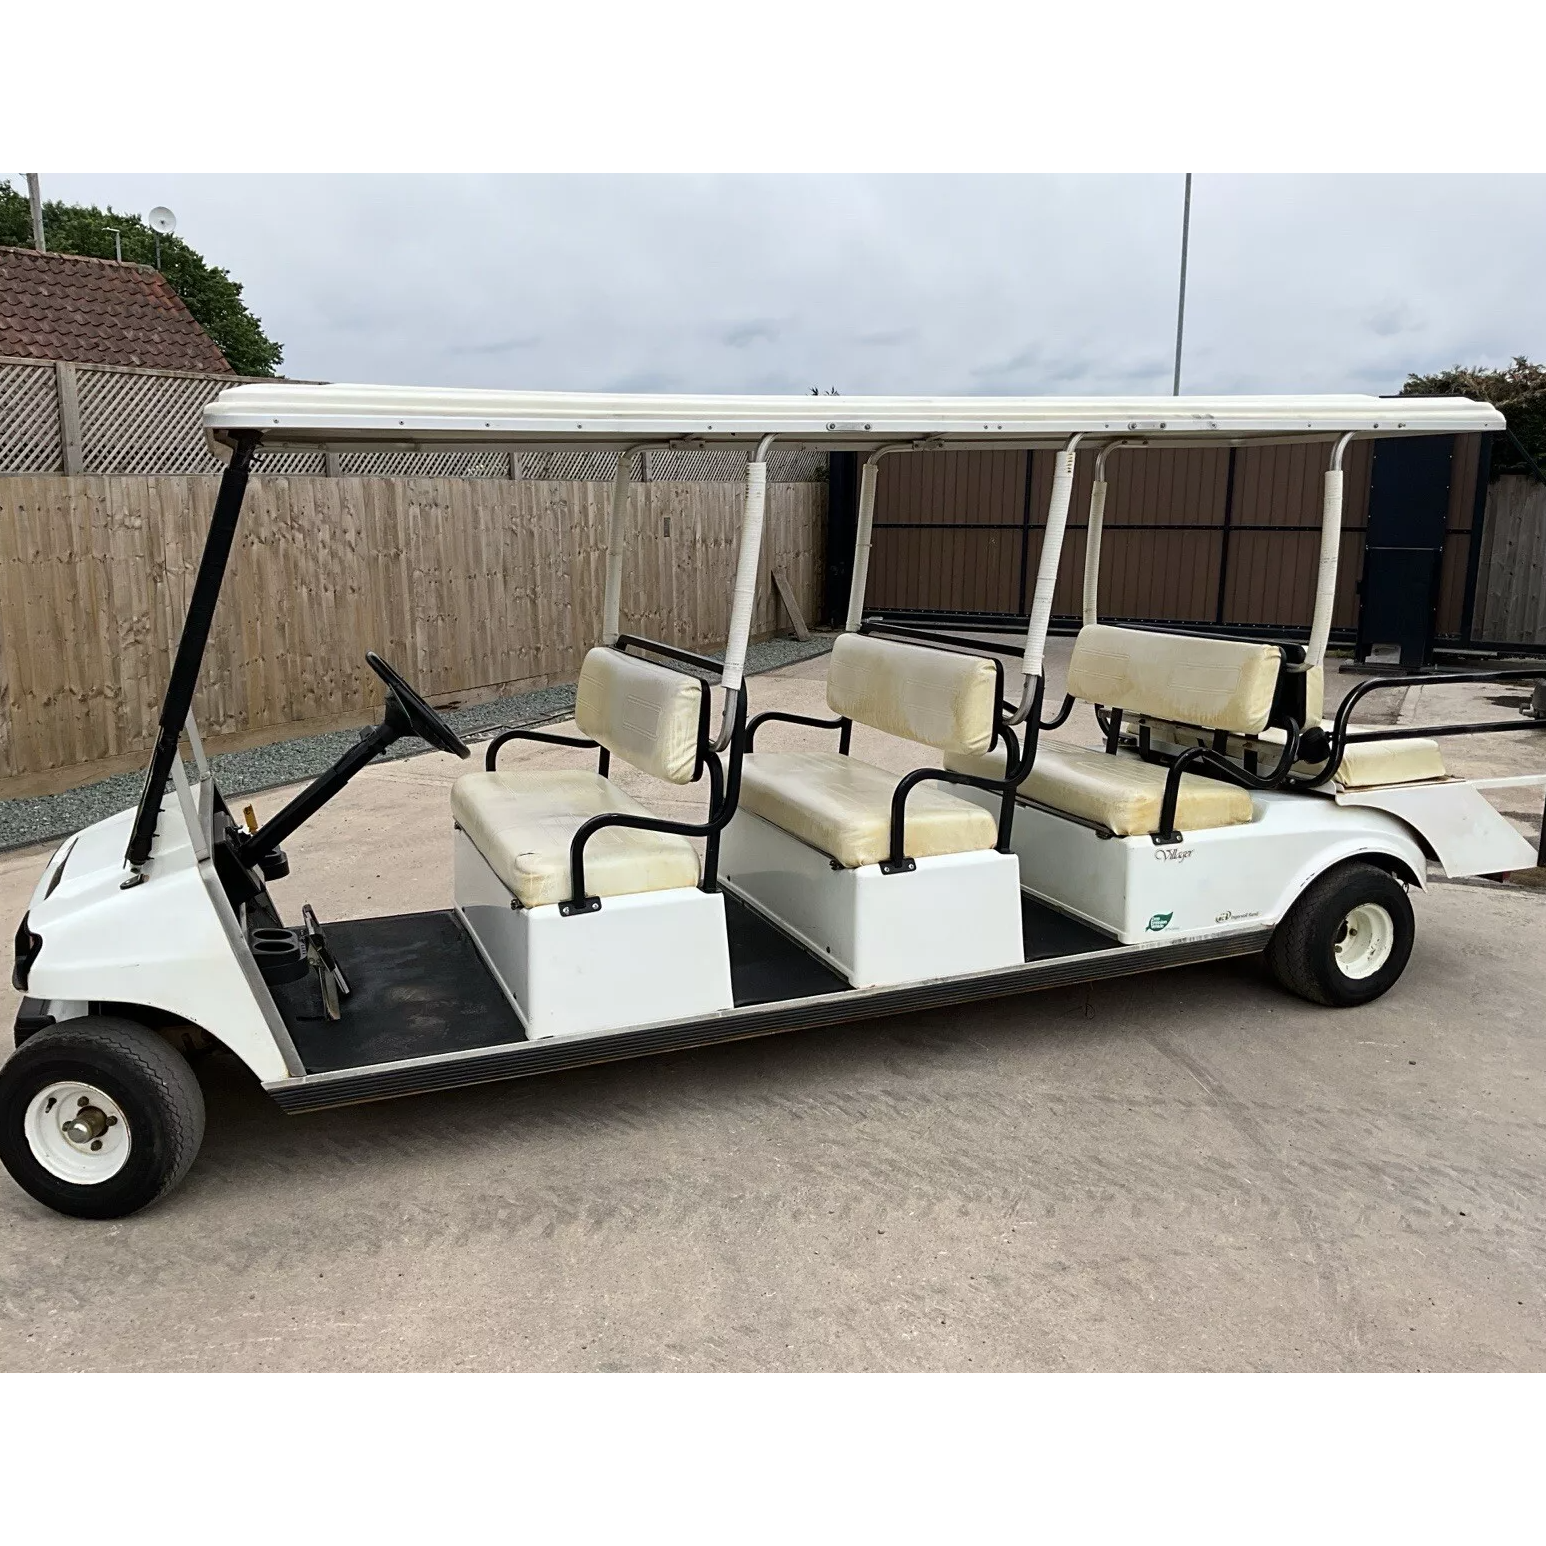 2011 CLUBCAR VILLAGER 48V ELECTRIC BATTERY POWERED PEOPLE CARRIER GOLF BUGGY